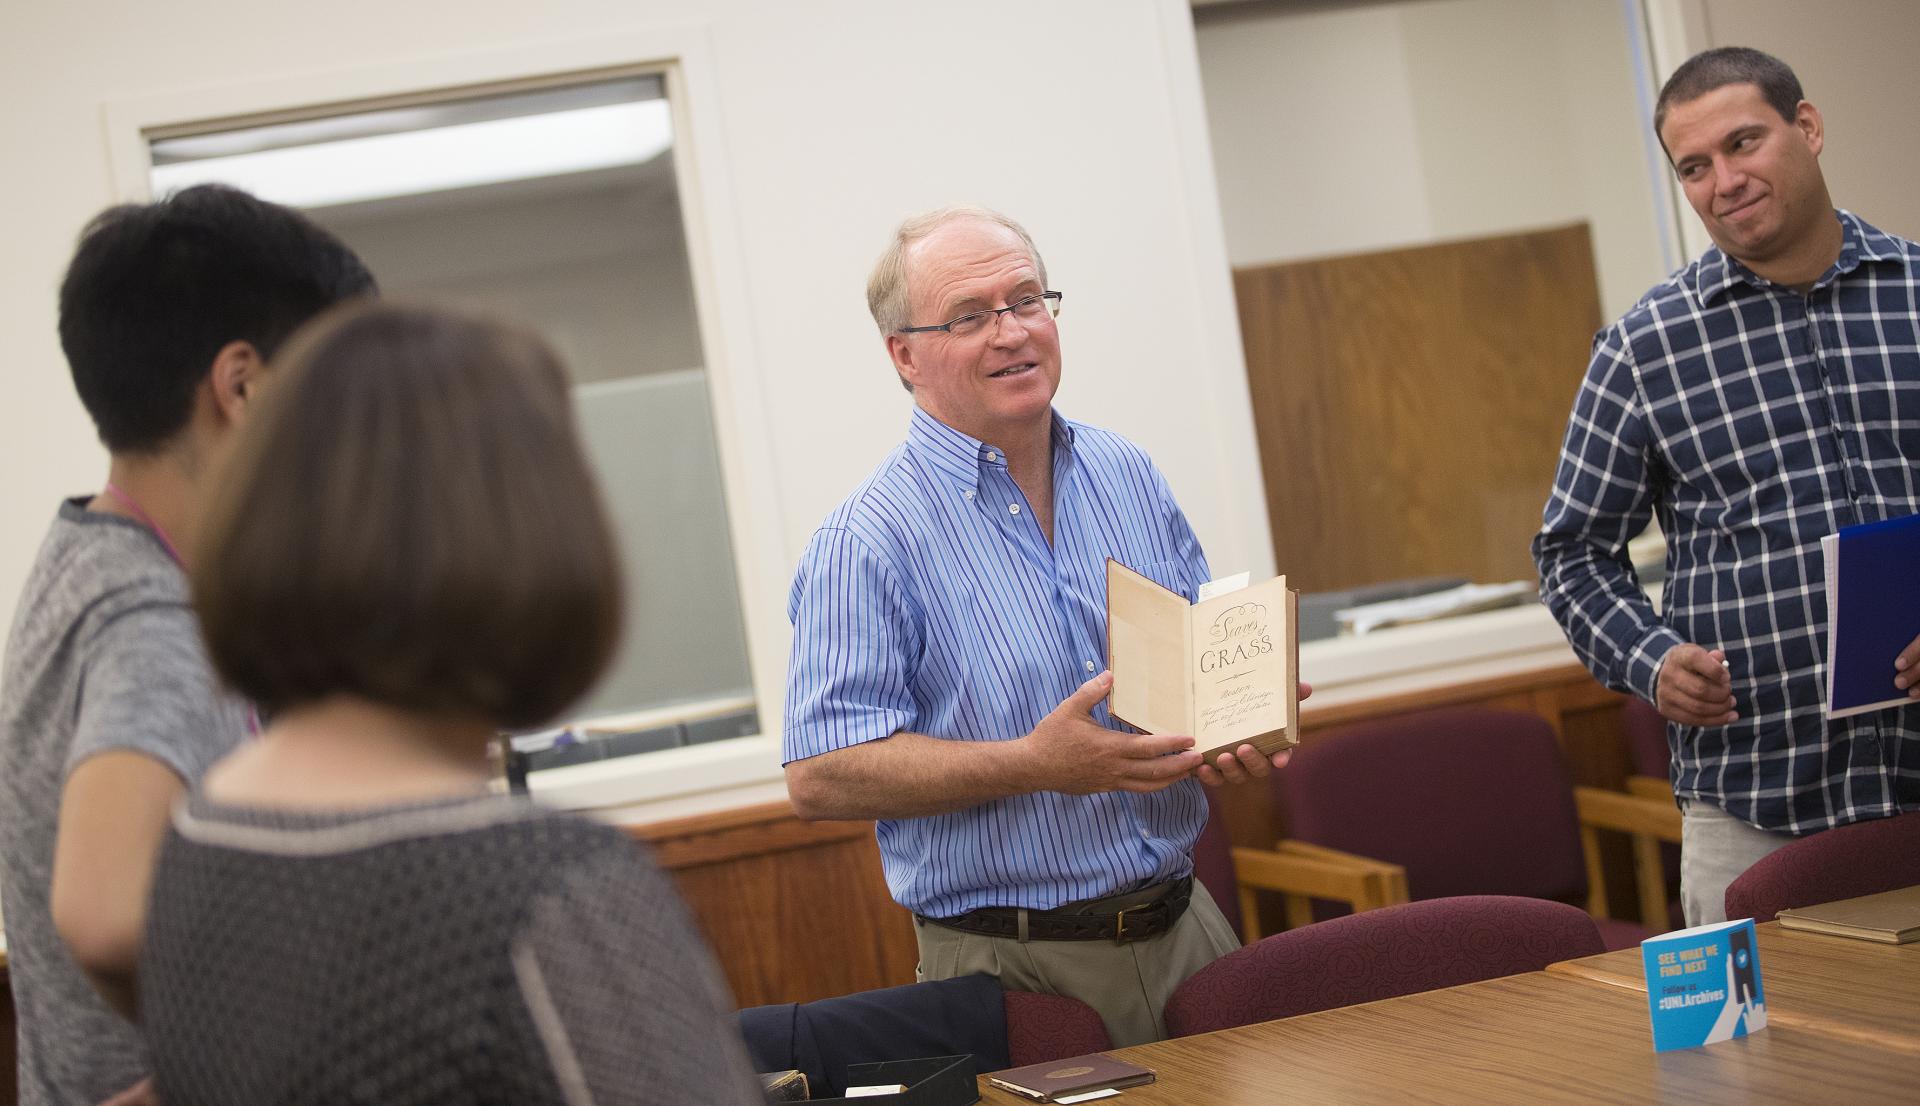 Professor Kenneth M. Price consults with students